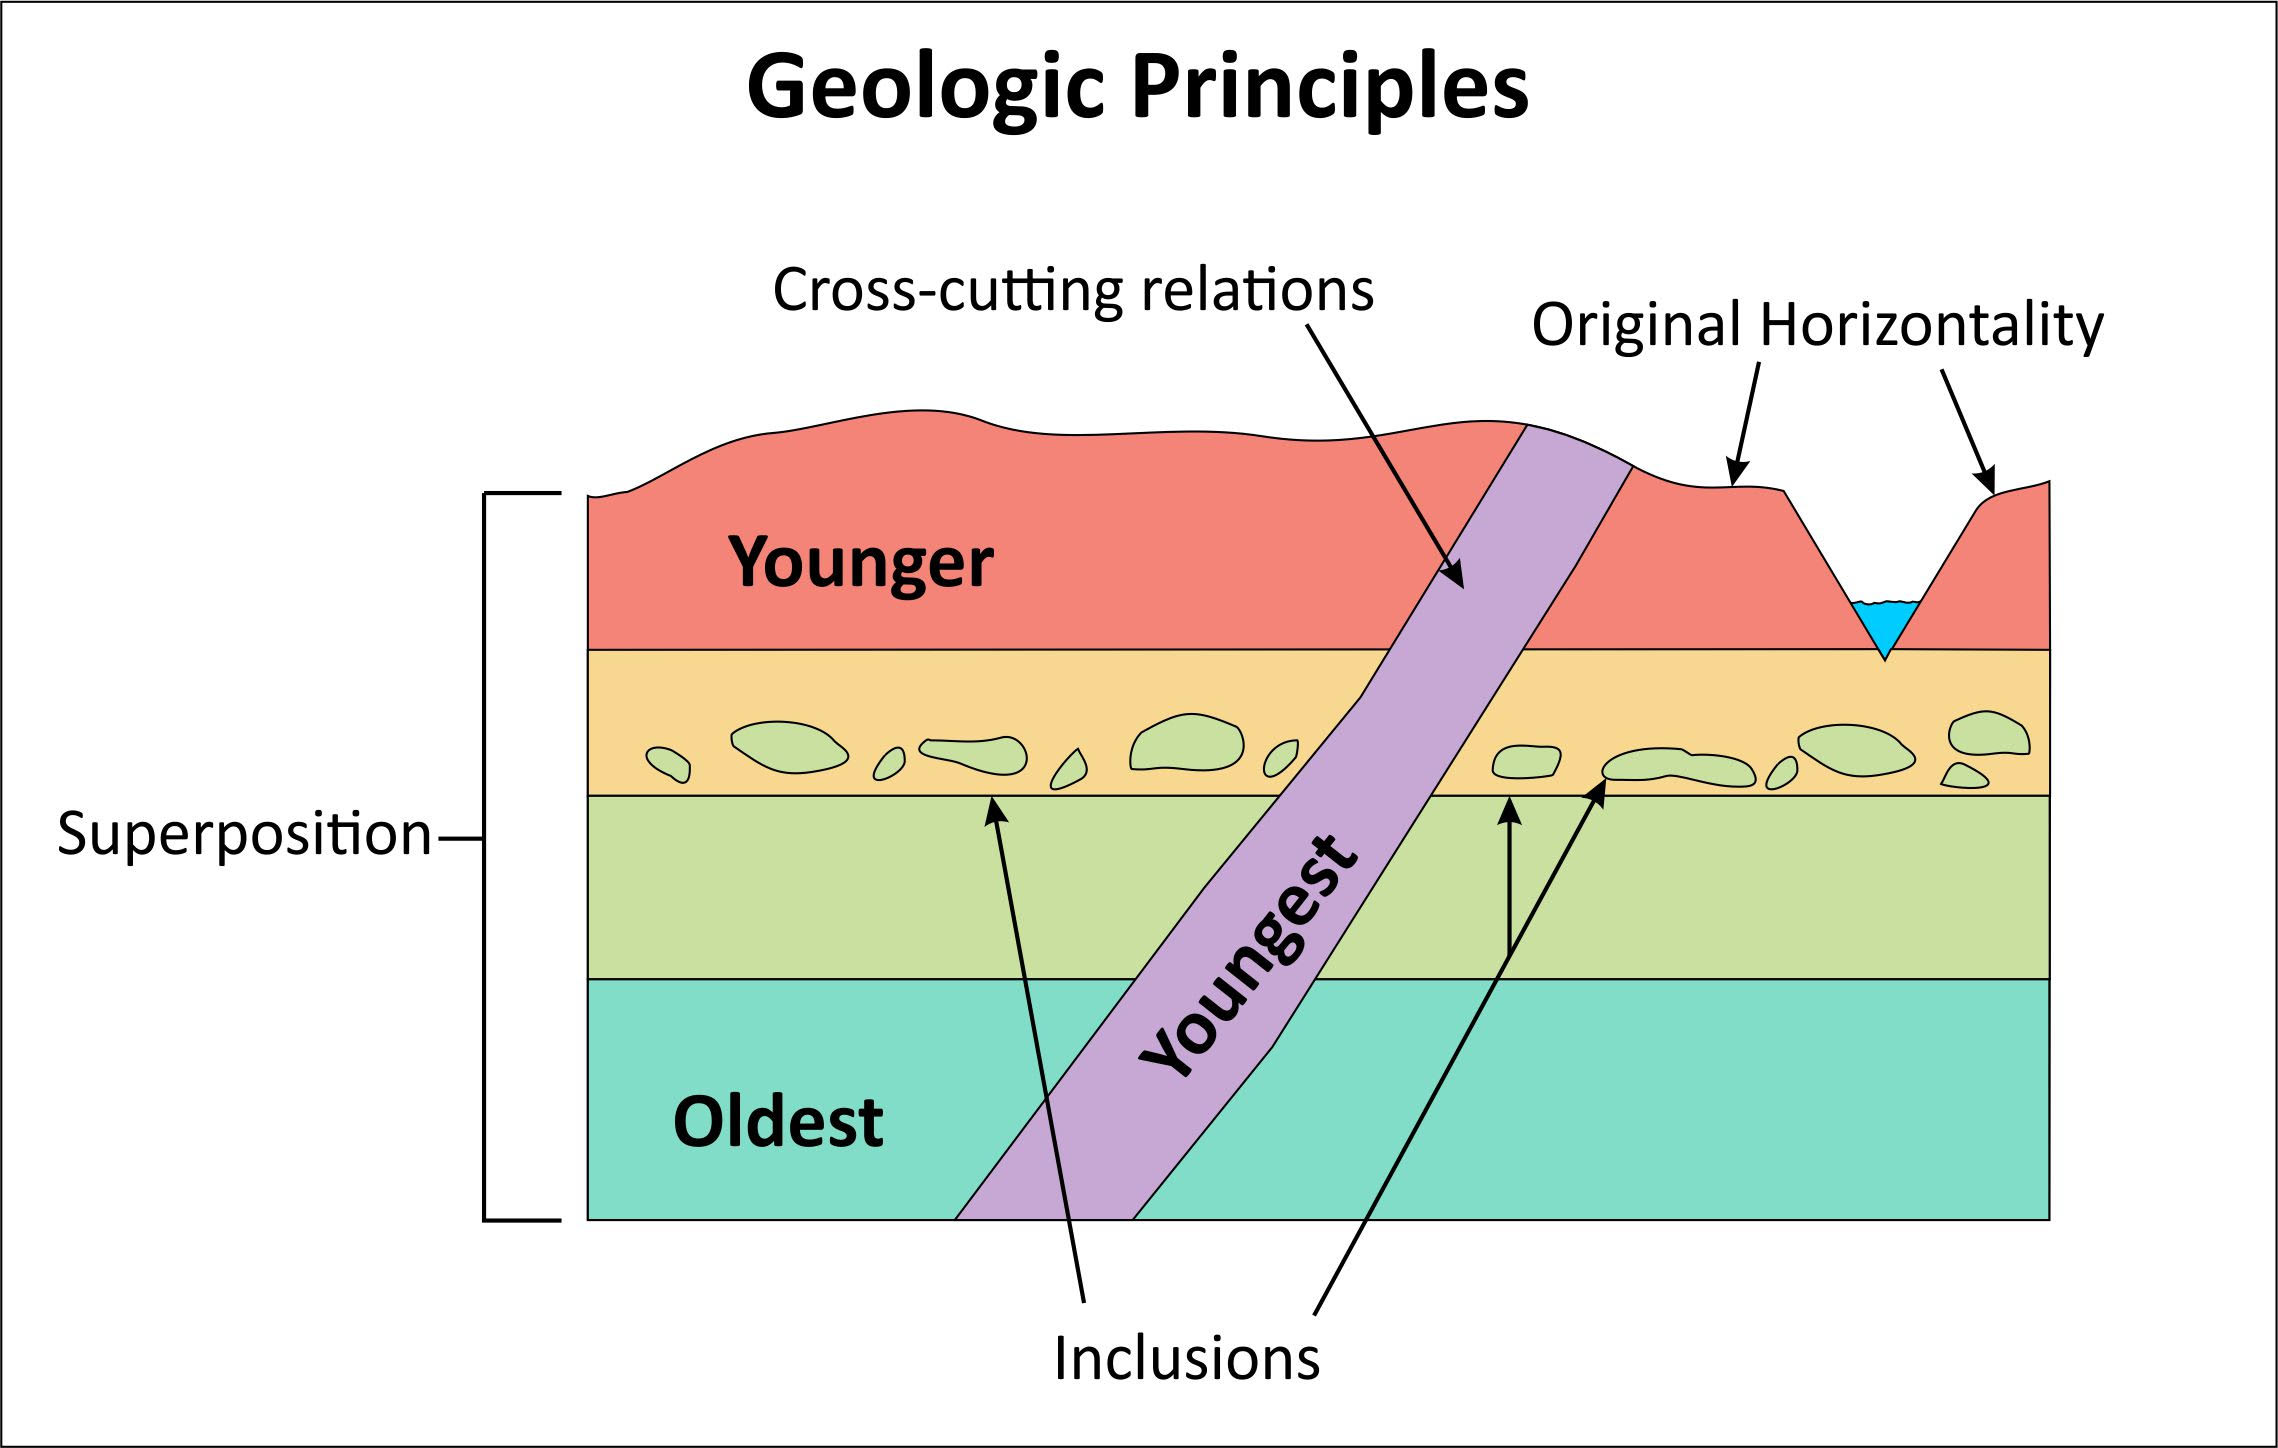 <p>features such as dikes, faults, and ignenous rock intrusions are the youngest formation</p>